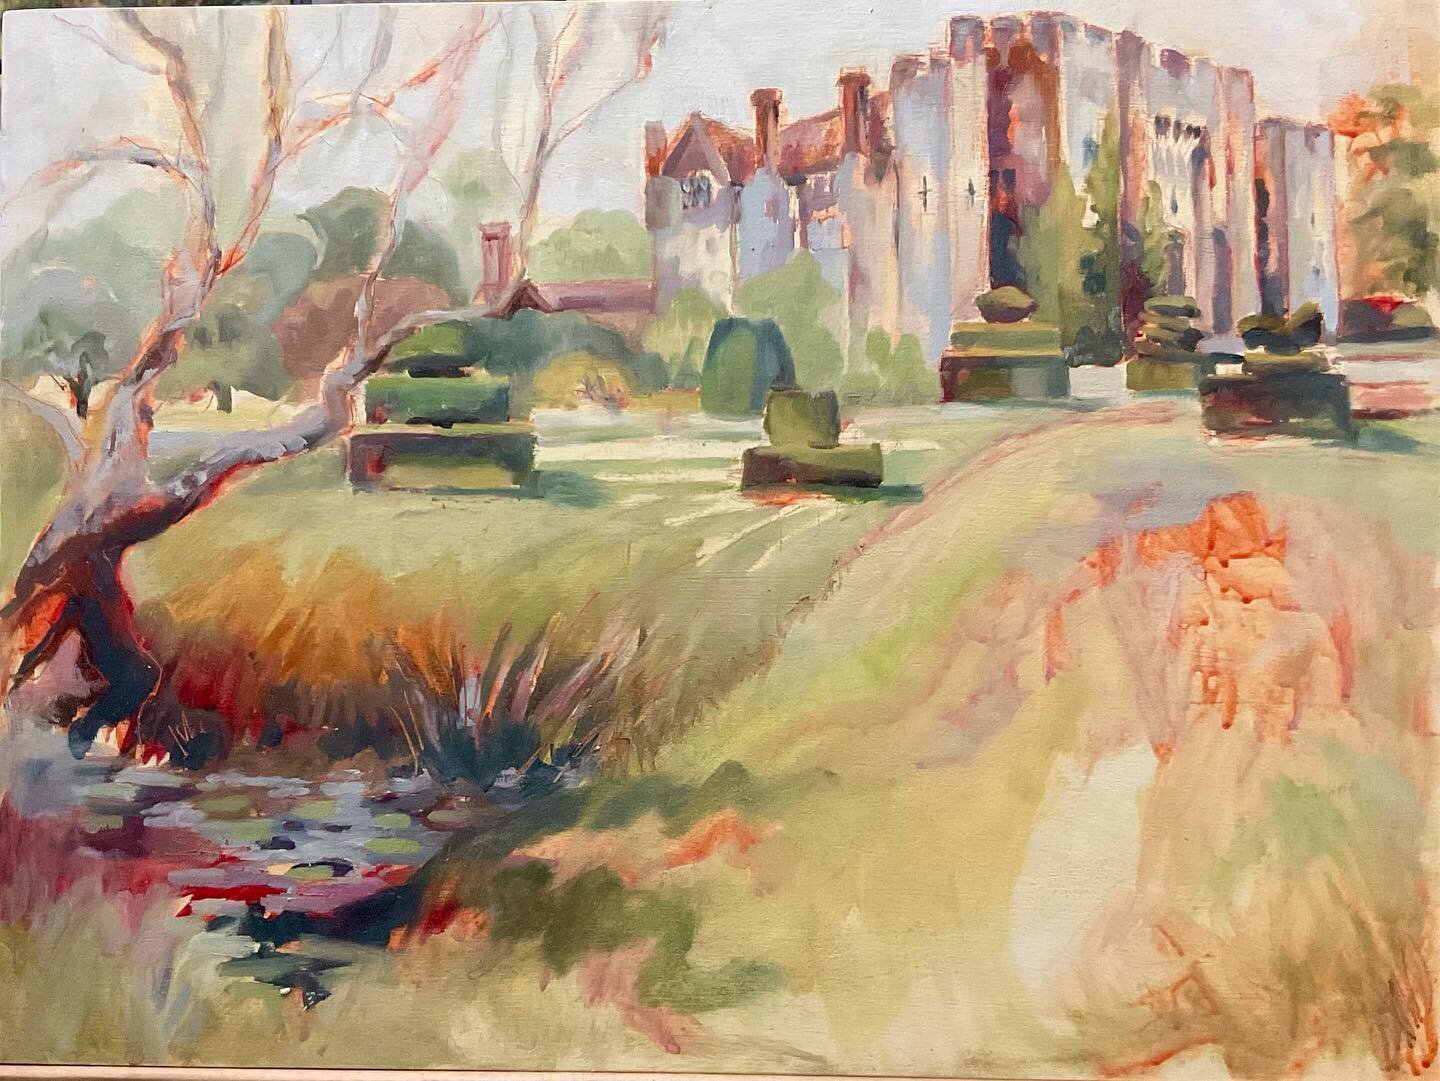 Hever Castle.Painted during heat 6 of #LAOTY2024.The following 3 works were painted in preparation for the day.

#skyartslandscapeartistoftheyear #landscapes #storyvaultfilms #hevercastlegardens #hevercastle #garden #contemparyart #eastsussex #eastsu